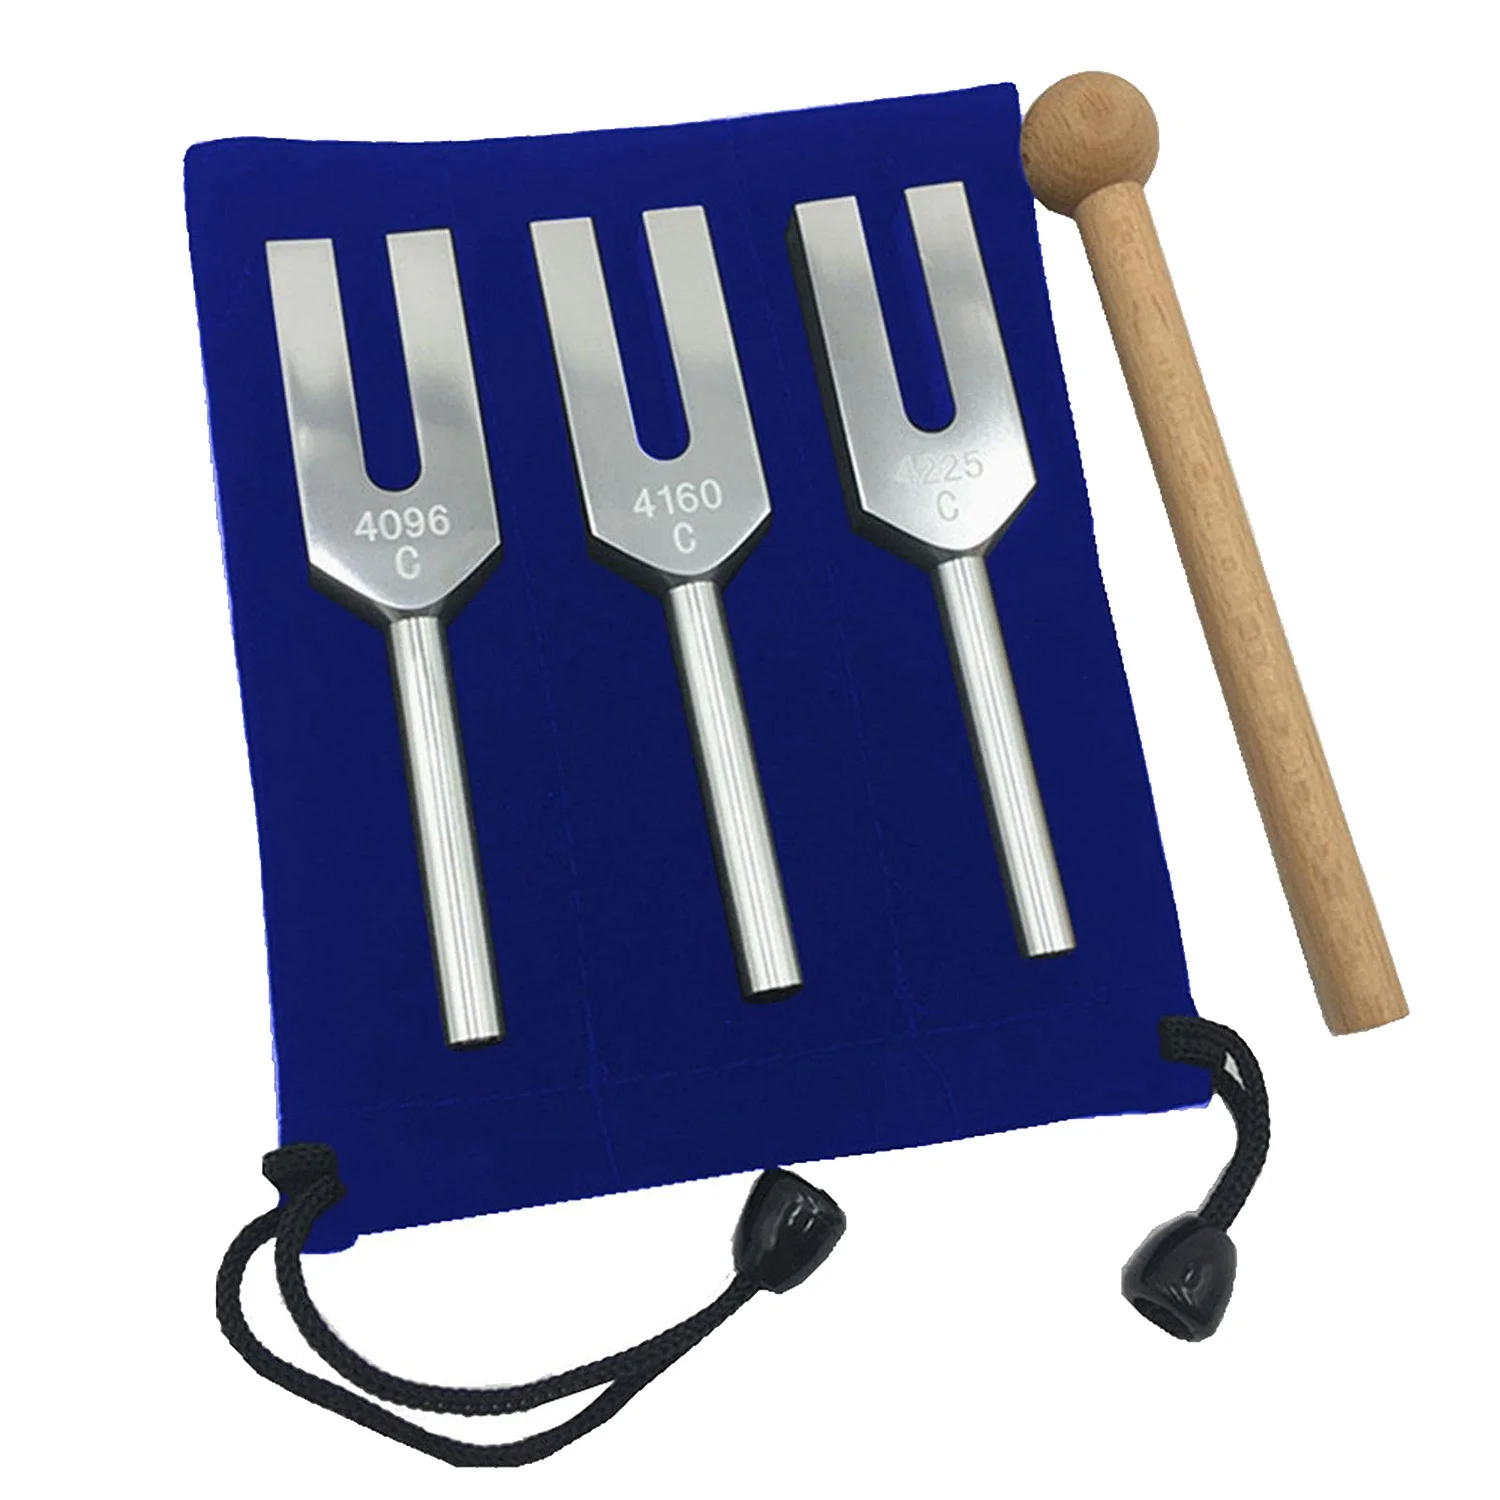 

Tuning Forks Set 4096 Hz 4160 Hz 4225 Hz Tuning Forks Set Tuning Fork with Wooden Hammers and Cloth Bag Style 1